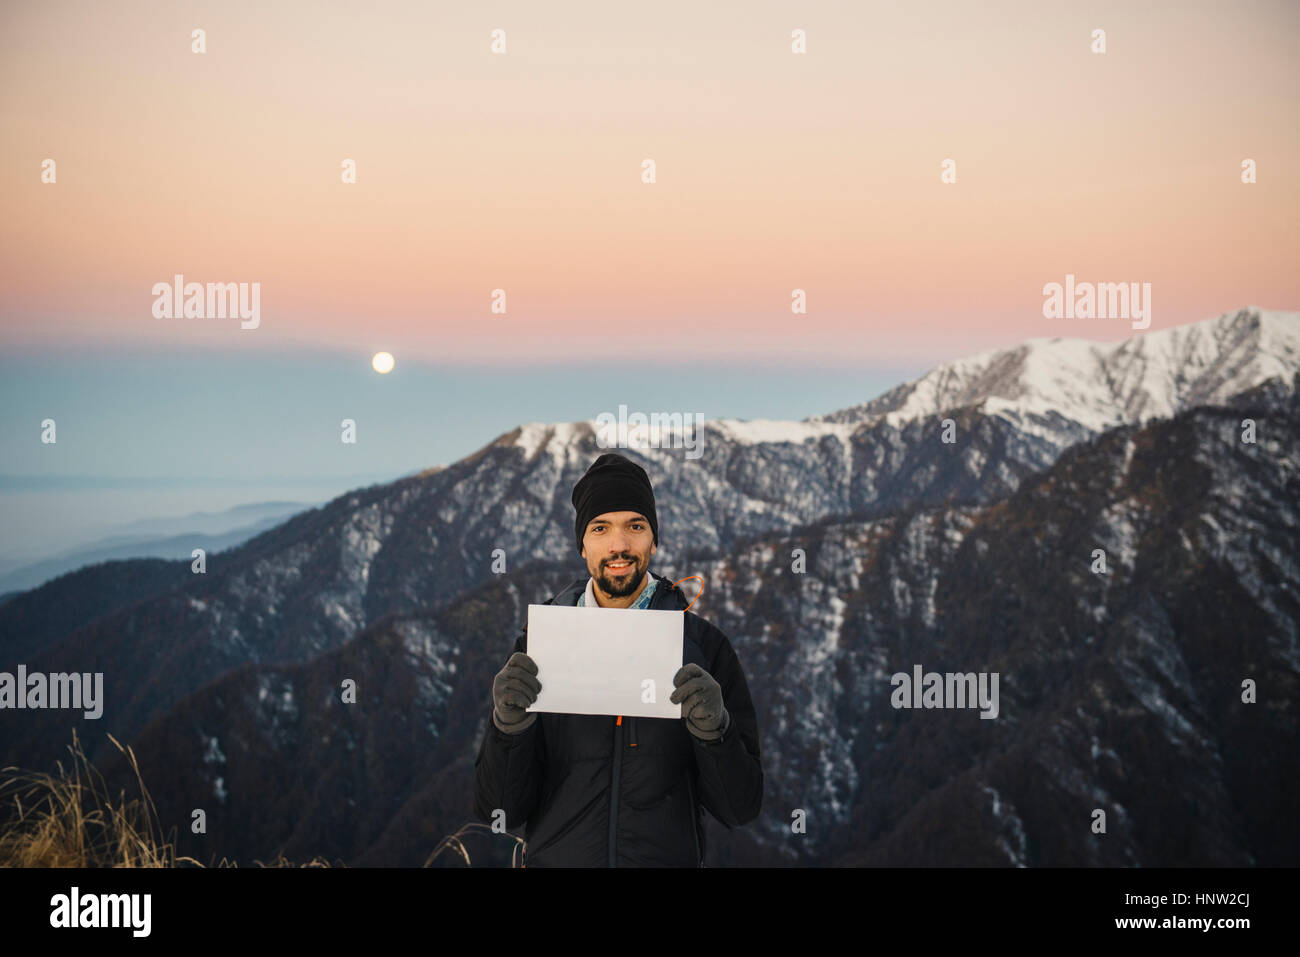 Smiling Caucasian man holding blank sign in mountain landscape Stock Photo